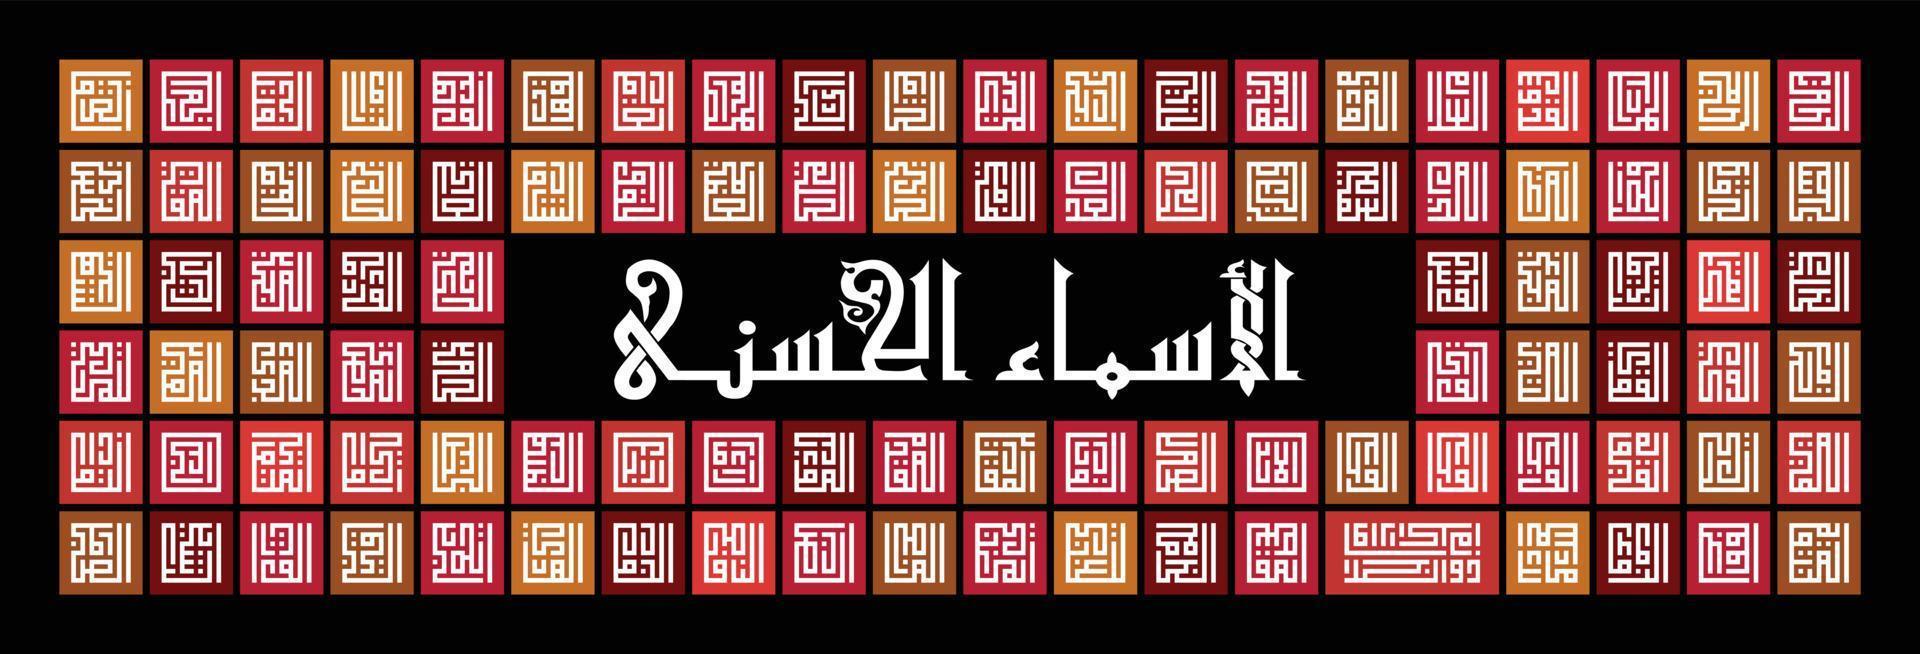 Arabic calligraphy 'Asmaul Husna' '99 names of Allah' in kufi style with red, orange and brown square pattern on black background. Great for home wall decoration. vector